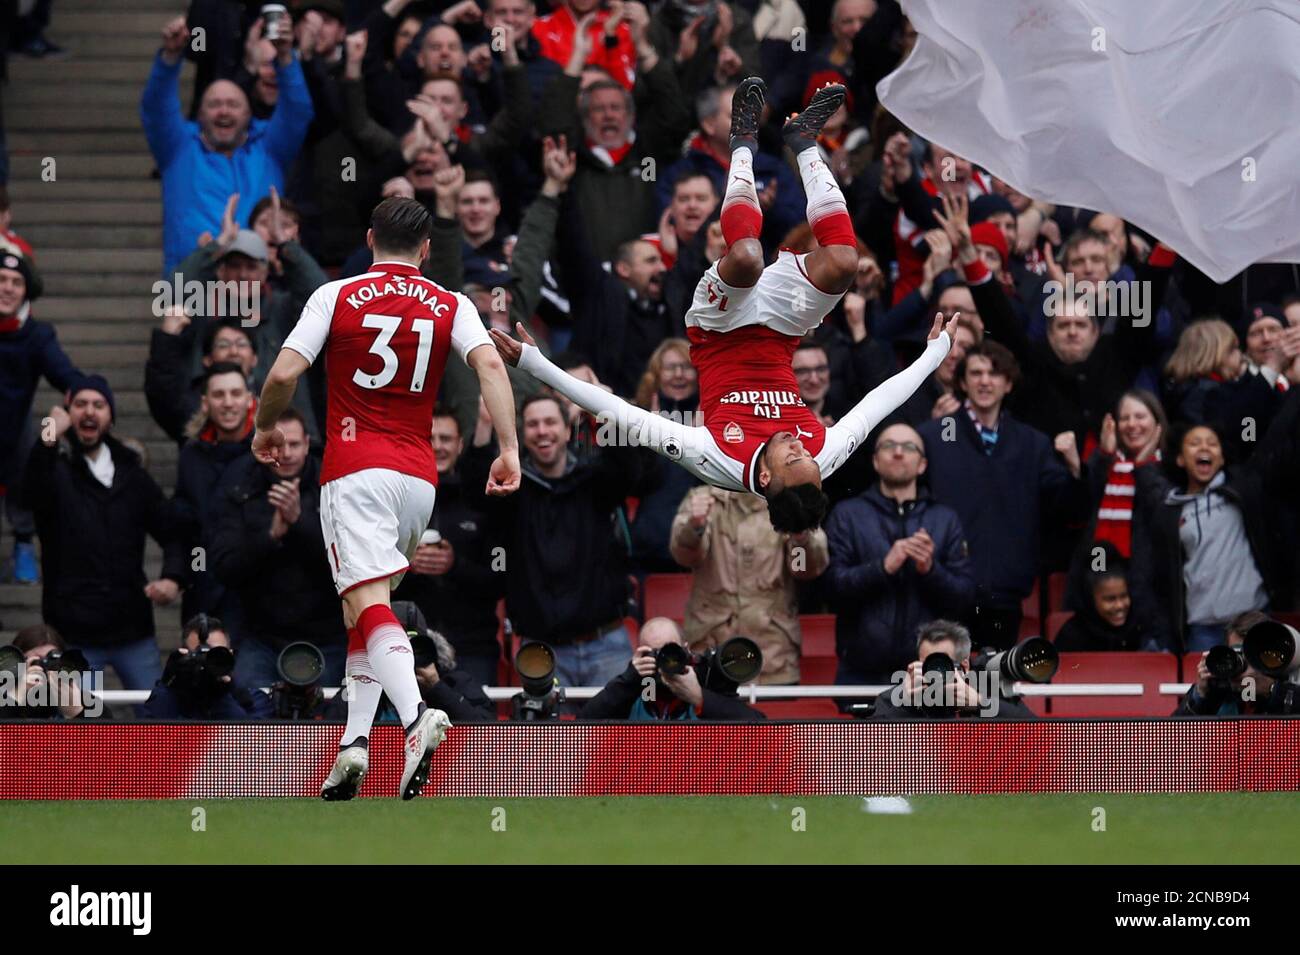 Soccer Football - Premier League - Arsenal vs Watford - Emirates Stadium, London, Britain - March 11, 2018   Arsenal's Pierre-Emerick Aubameyang celebrates scoring their second goal    REUTERS/Eddie Keogh    EDITORIAL USE ONLY. No use with unauthorized audio, video, data, fixture lists, club/league logos or 'live' services. Online in-match use limited to 75 images, no video emulation. No use in betting, games or single club/league/player publications.  Please contact your account representative for further details. Stock Photo